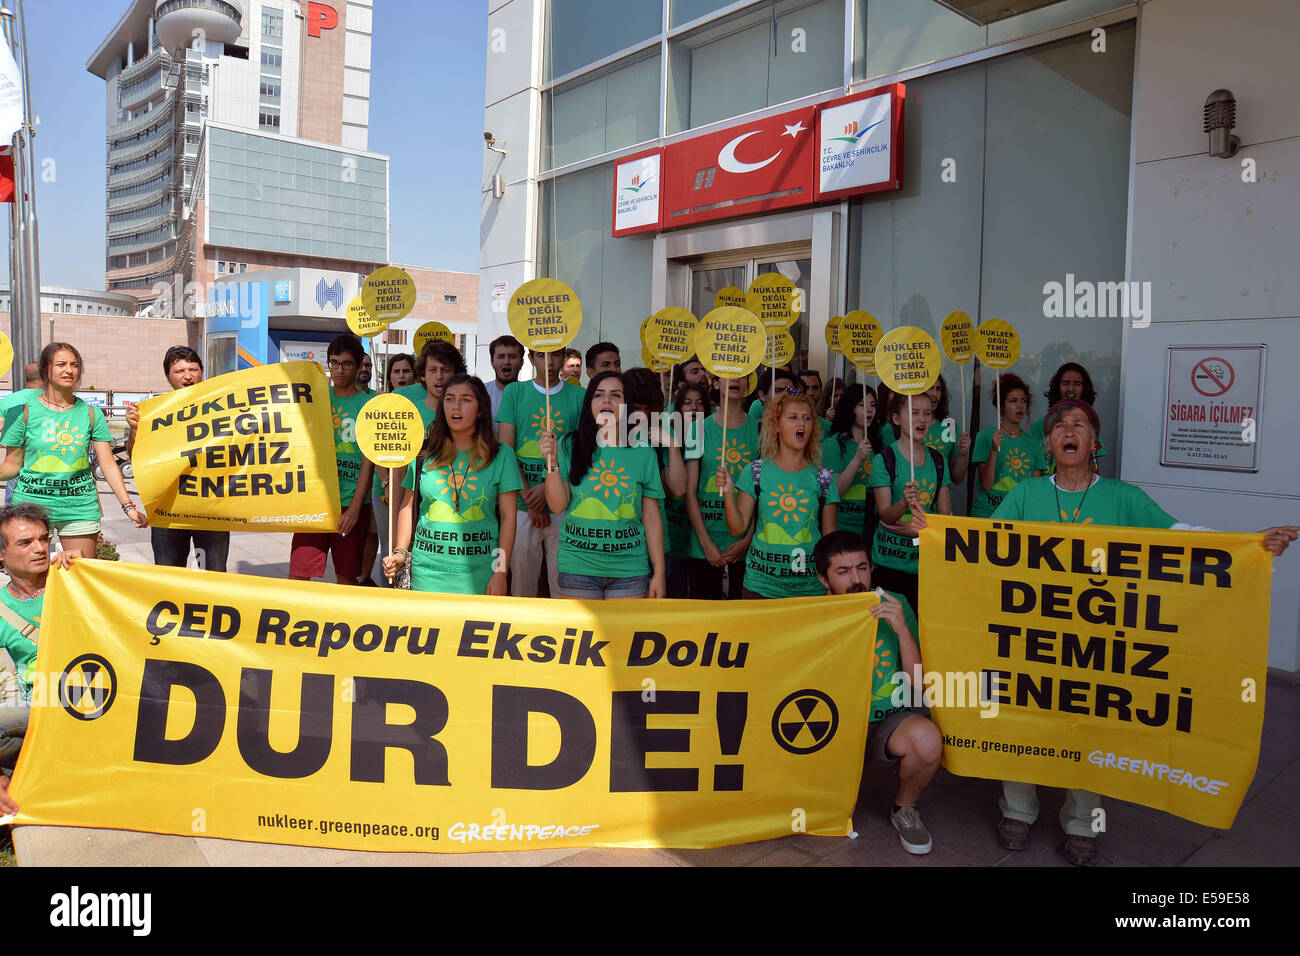 Ankara, Turkey. 24th July, 2014. Members of the Greenpeace protest in front of the Ministry of Environment and Urban Planning of Turkey against the construction of nuclear power plants in the country on July 24, 2014. Turkey has currently two nuclear power plants under construction. One is Akkuyu Nuclear Power Plant in the southern province of Mersin and the other to be built in the northern city of Sinop. Credit:  Xinhua/Alamy Live News Stock Photo